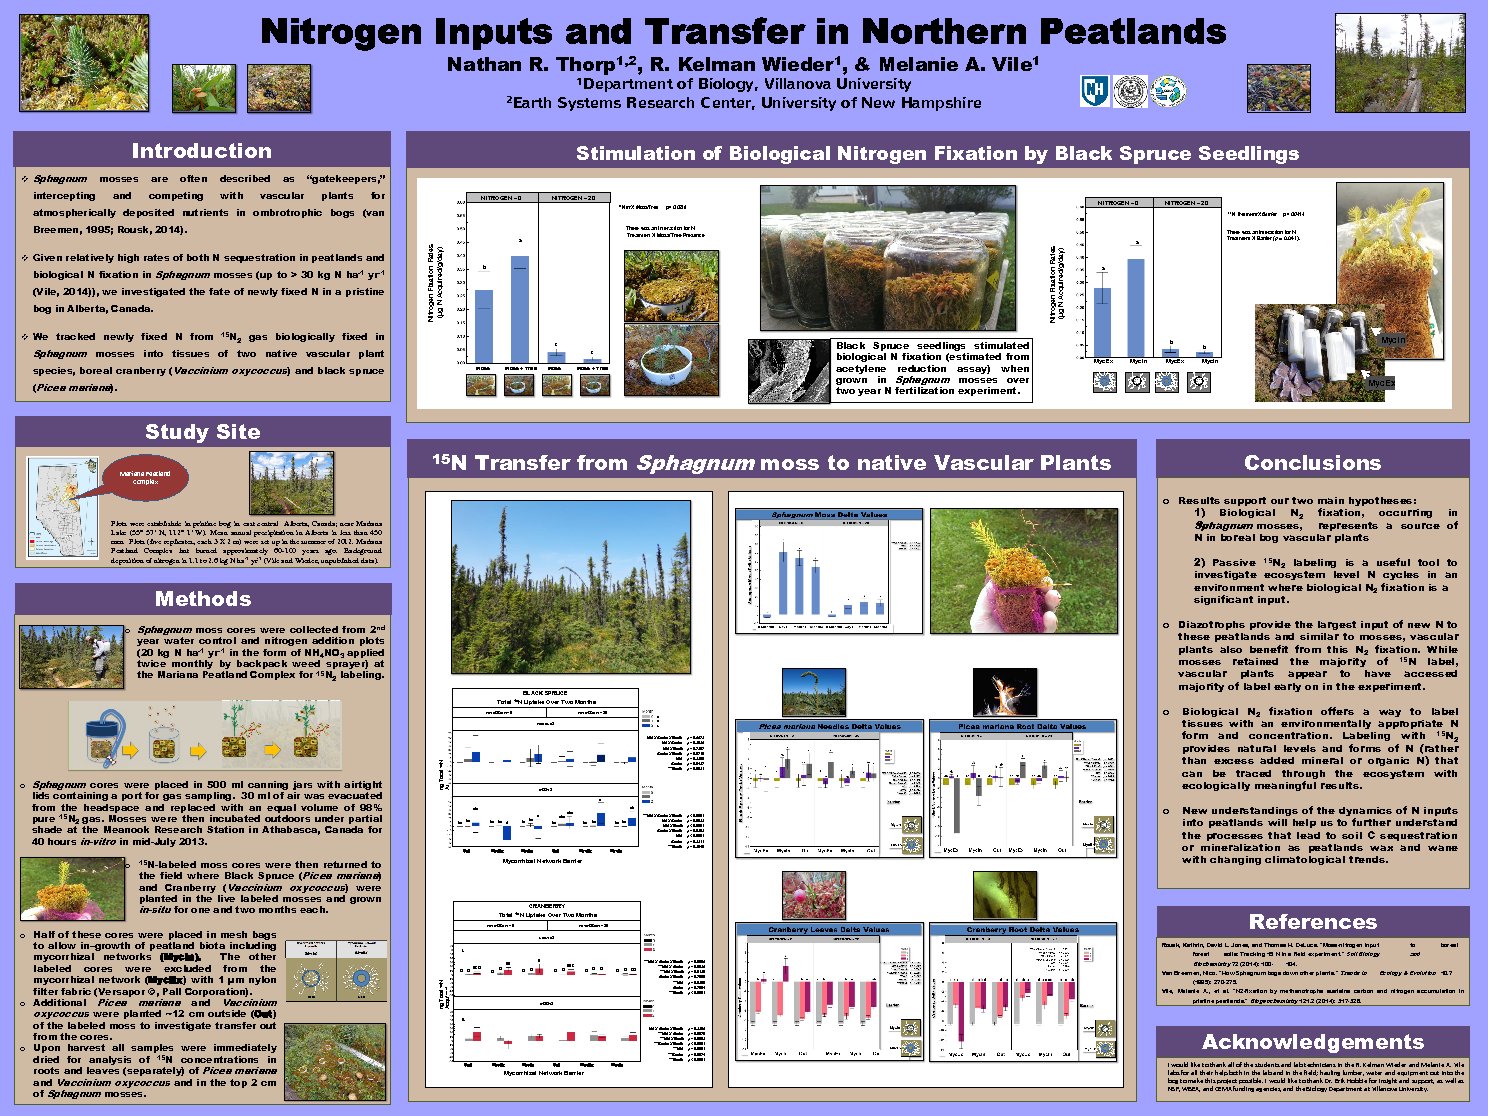 Nitrogen Inputs And Transfer In Northern Peatlands by NateThorp